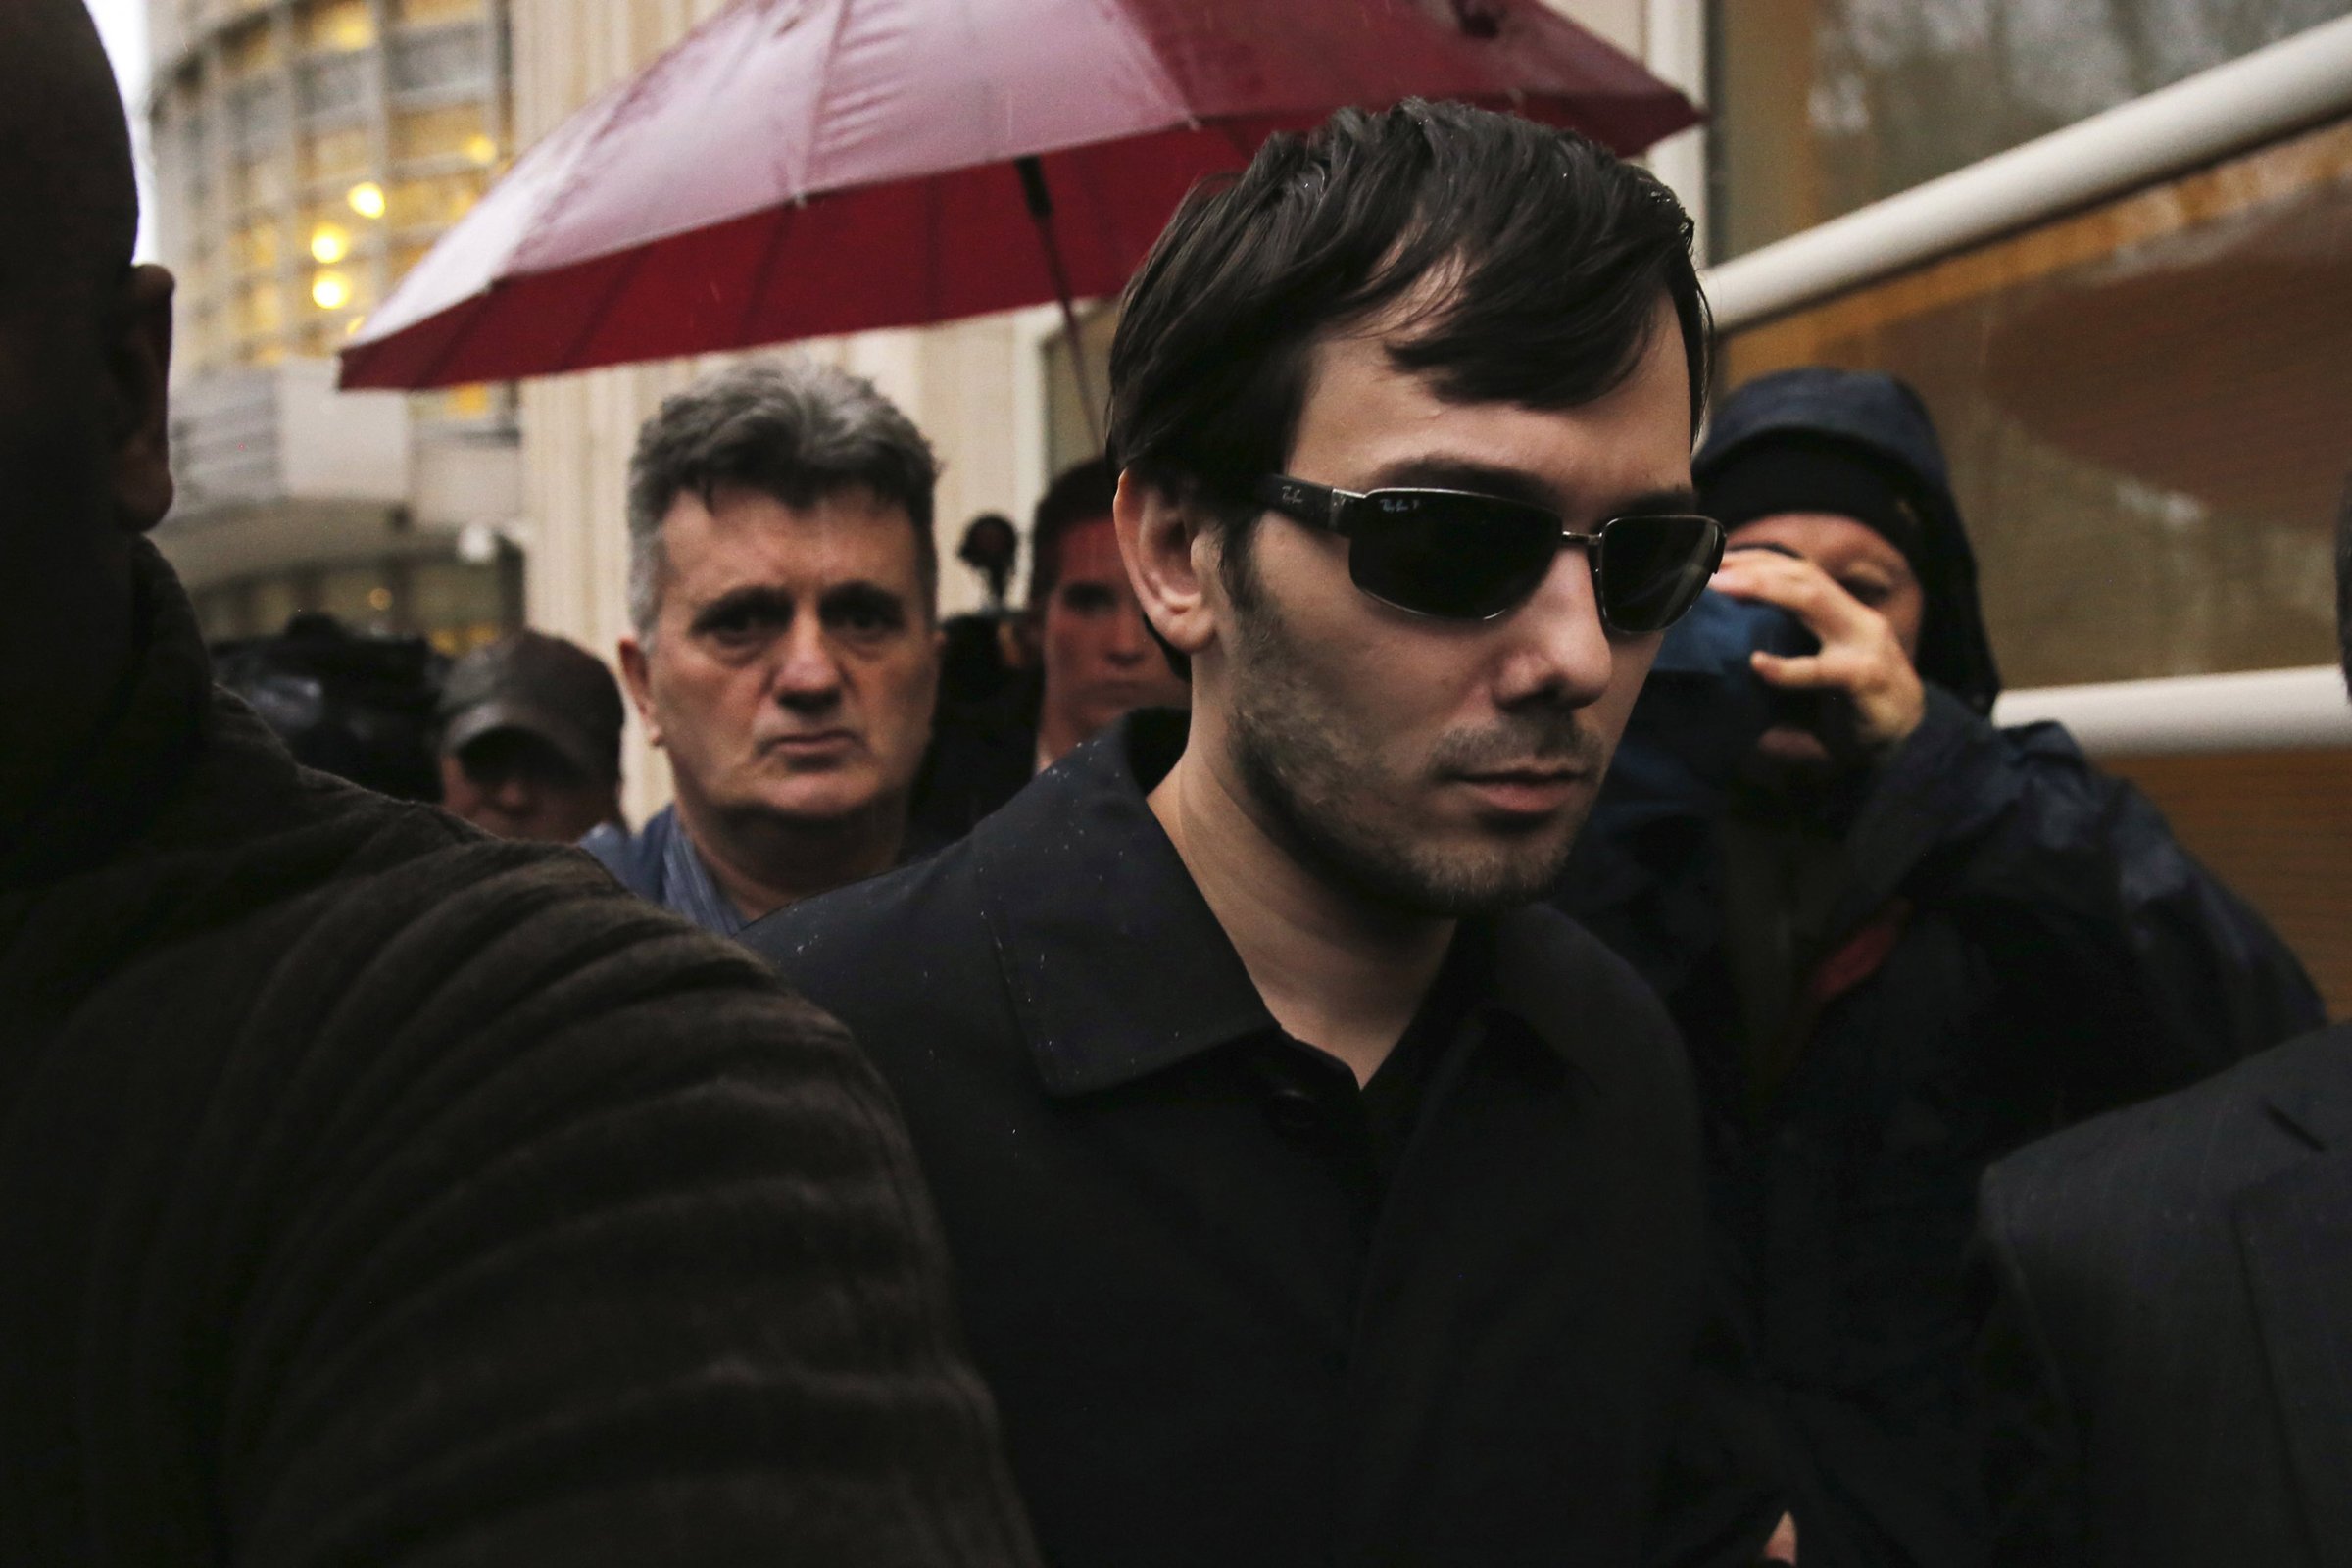 Martin Shkreli, chief executive officer of Turing Pharmaceuticals and KaloBios Pharmaceuticals Inc, departs U.S. Federal Court after an arraignment following his being charged in a federal indictment filed in Brooklyn relating to his management of hedge fund MSMB Capital Management and biopharmaceutical company Retrophin Inc. in New York December 17, 2015. REUTERS/Lucas Jackson